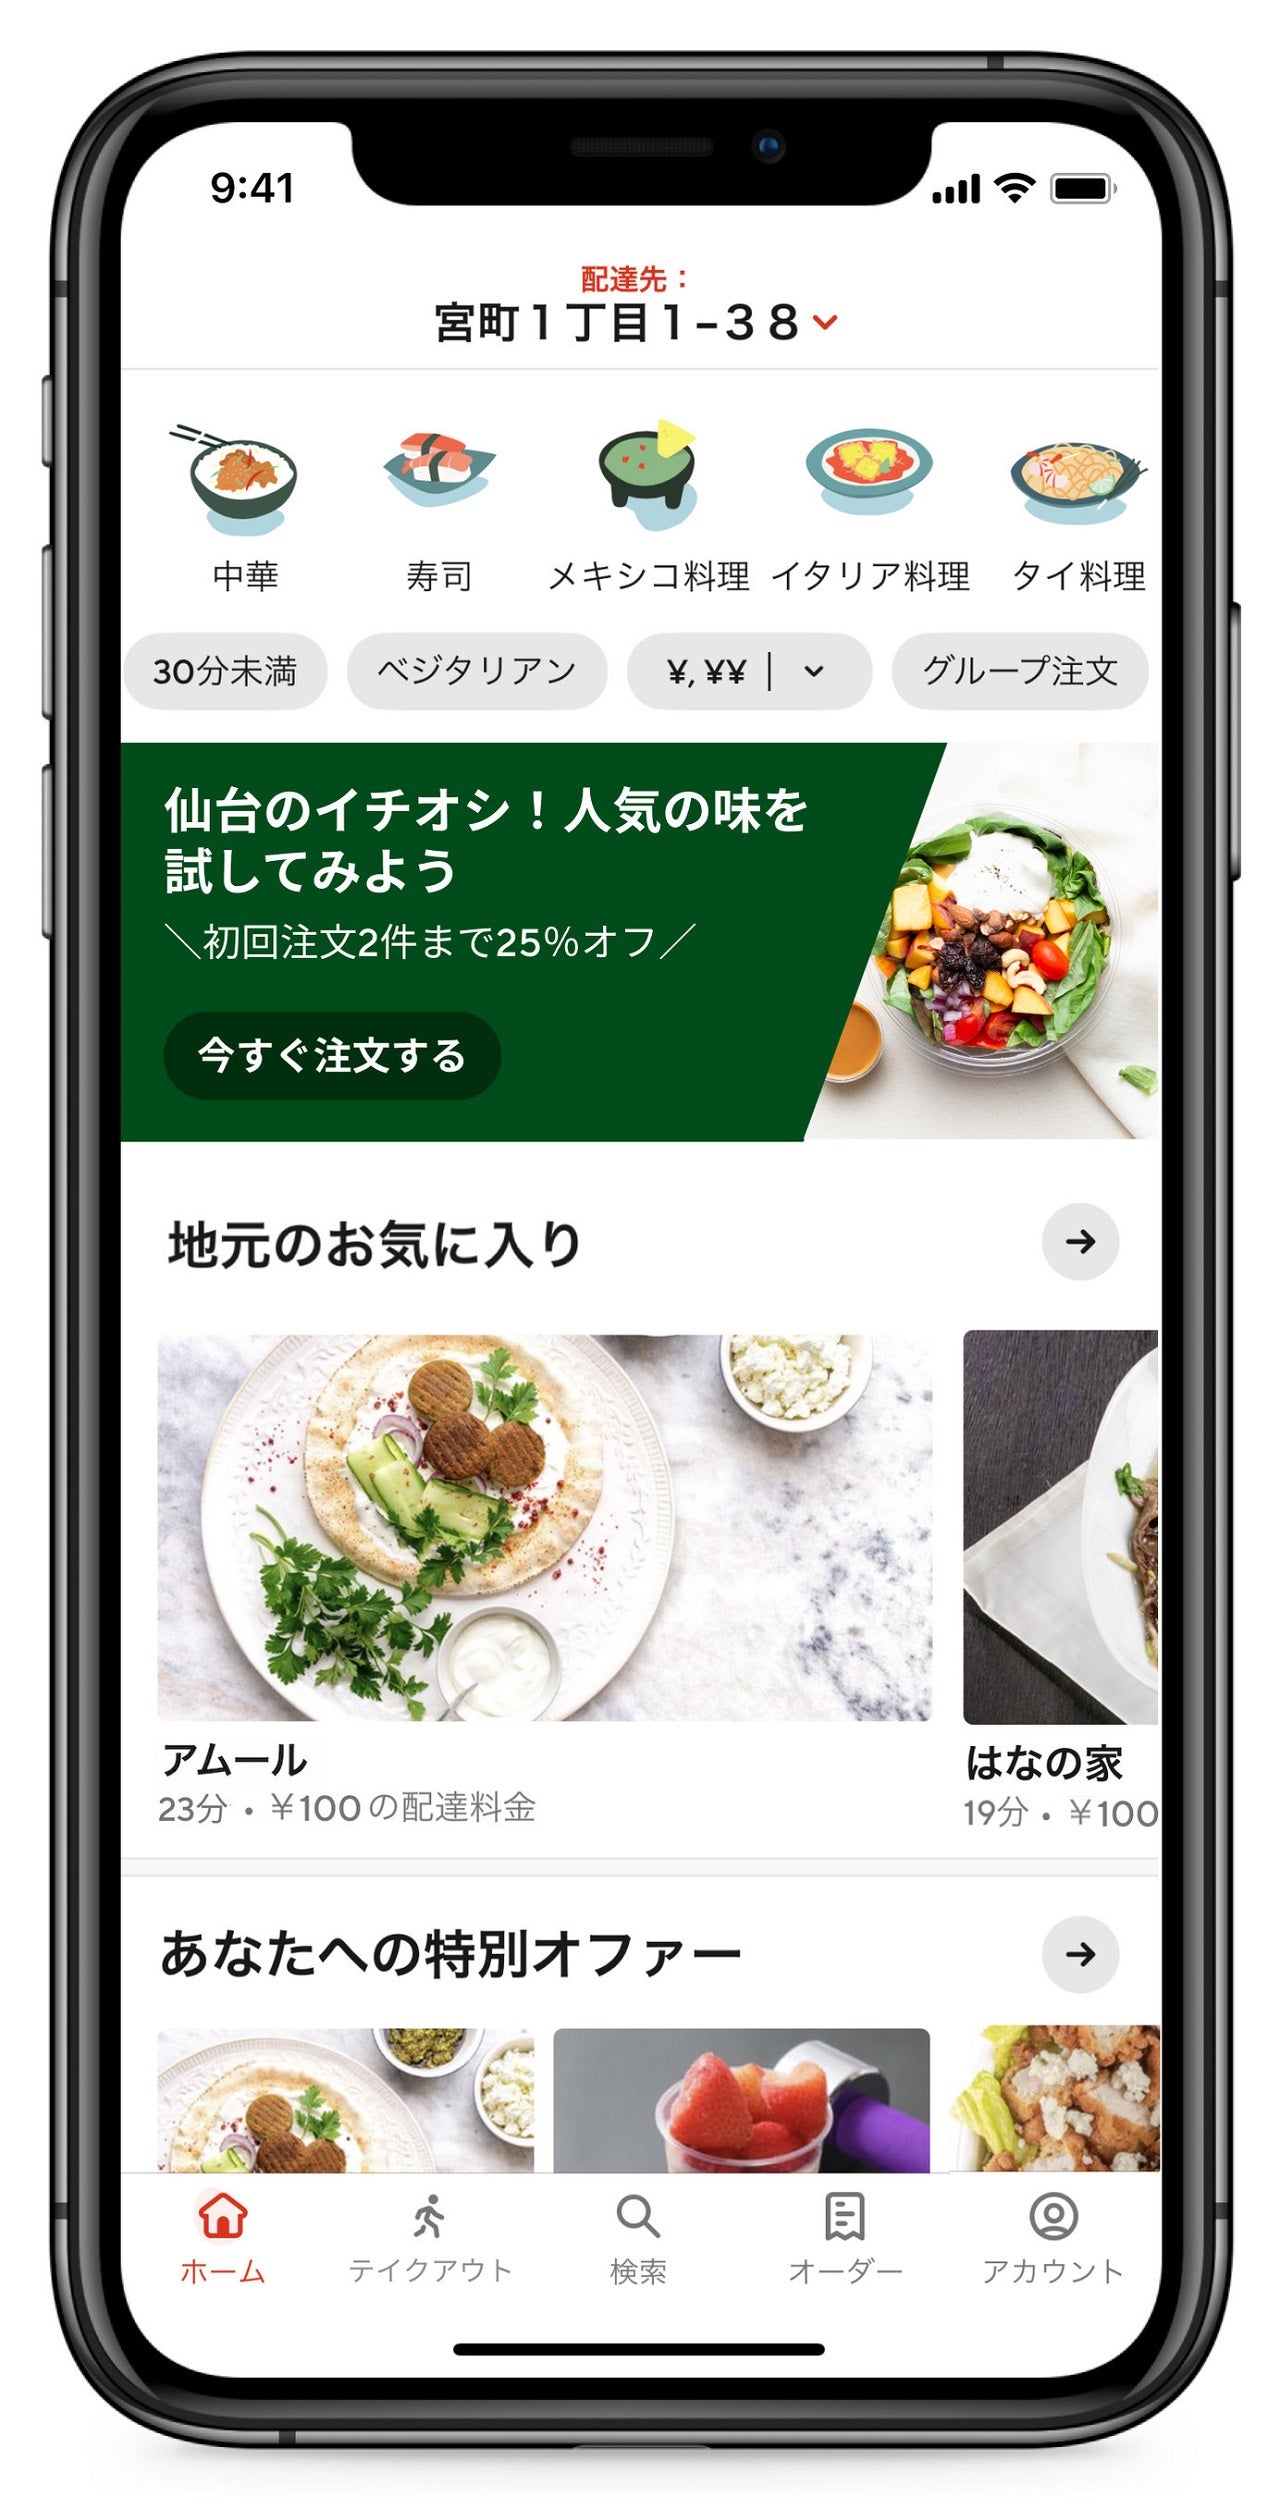 DoorDash launches operations in Japan